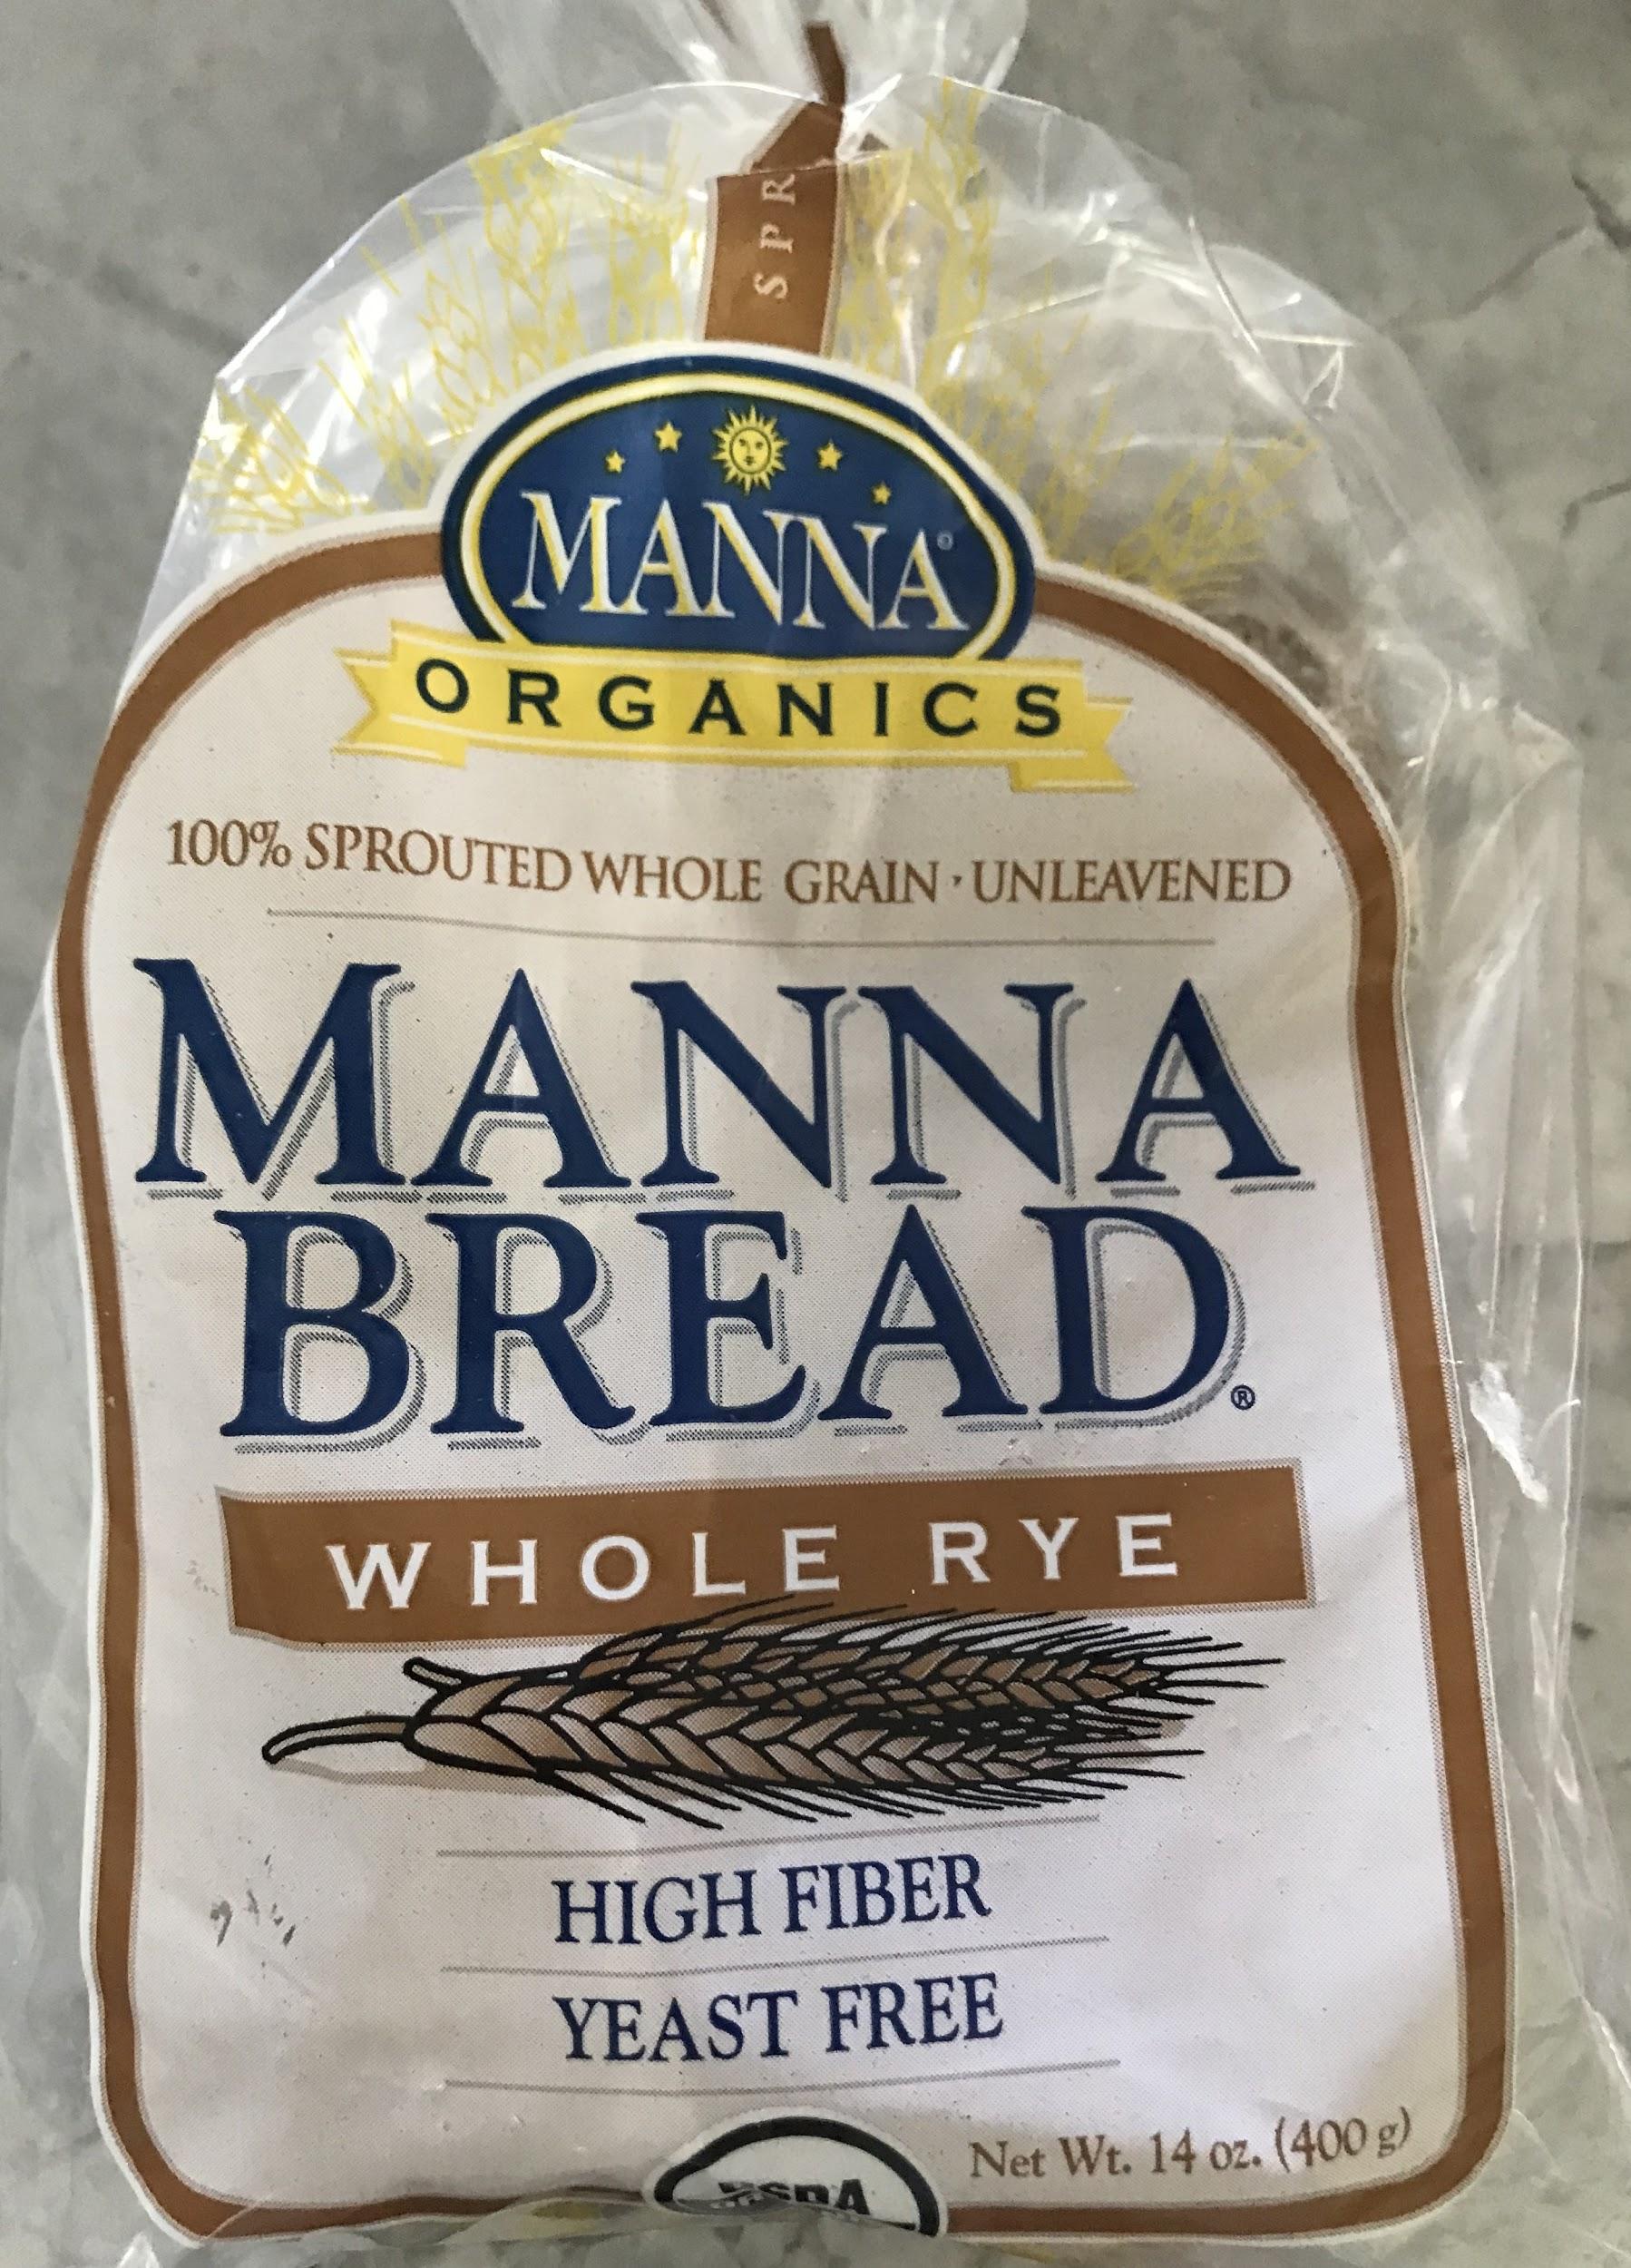 A picture of 100% sprouted whole grain-unleavened Manna Bread.